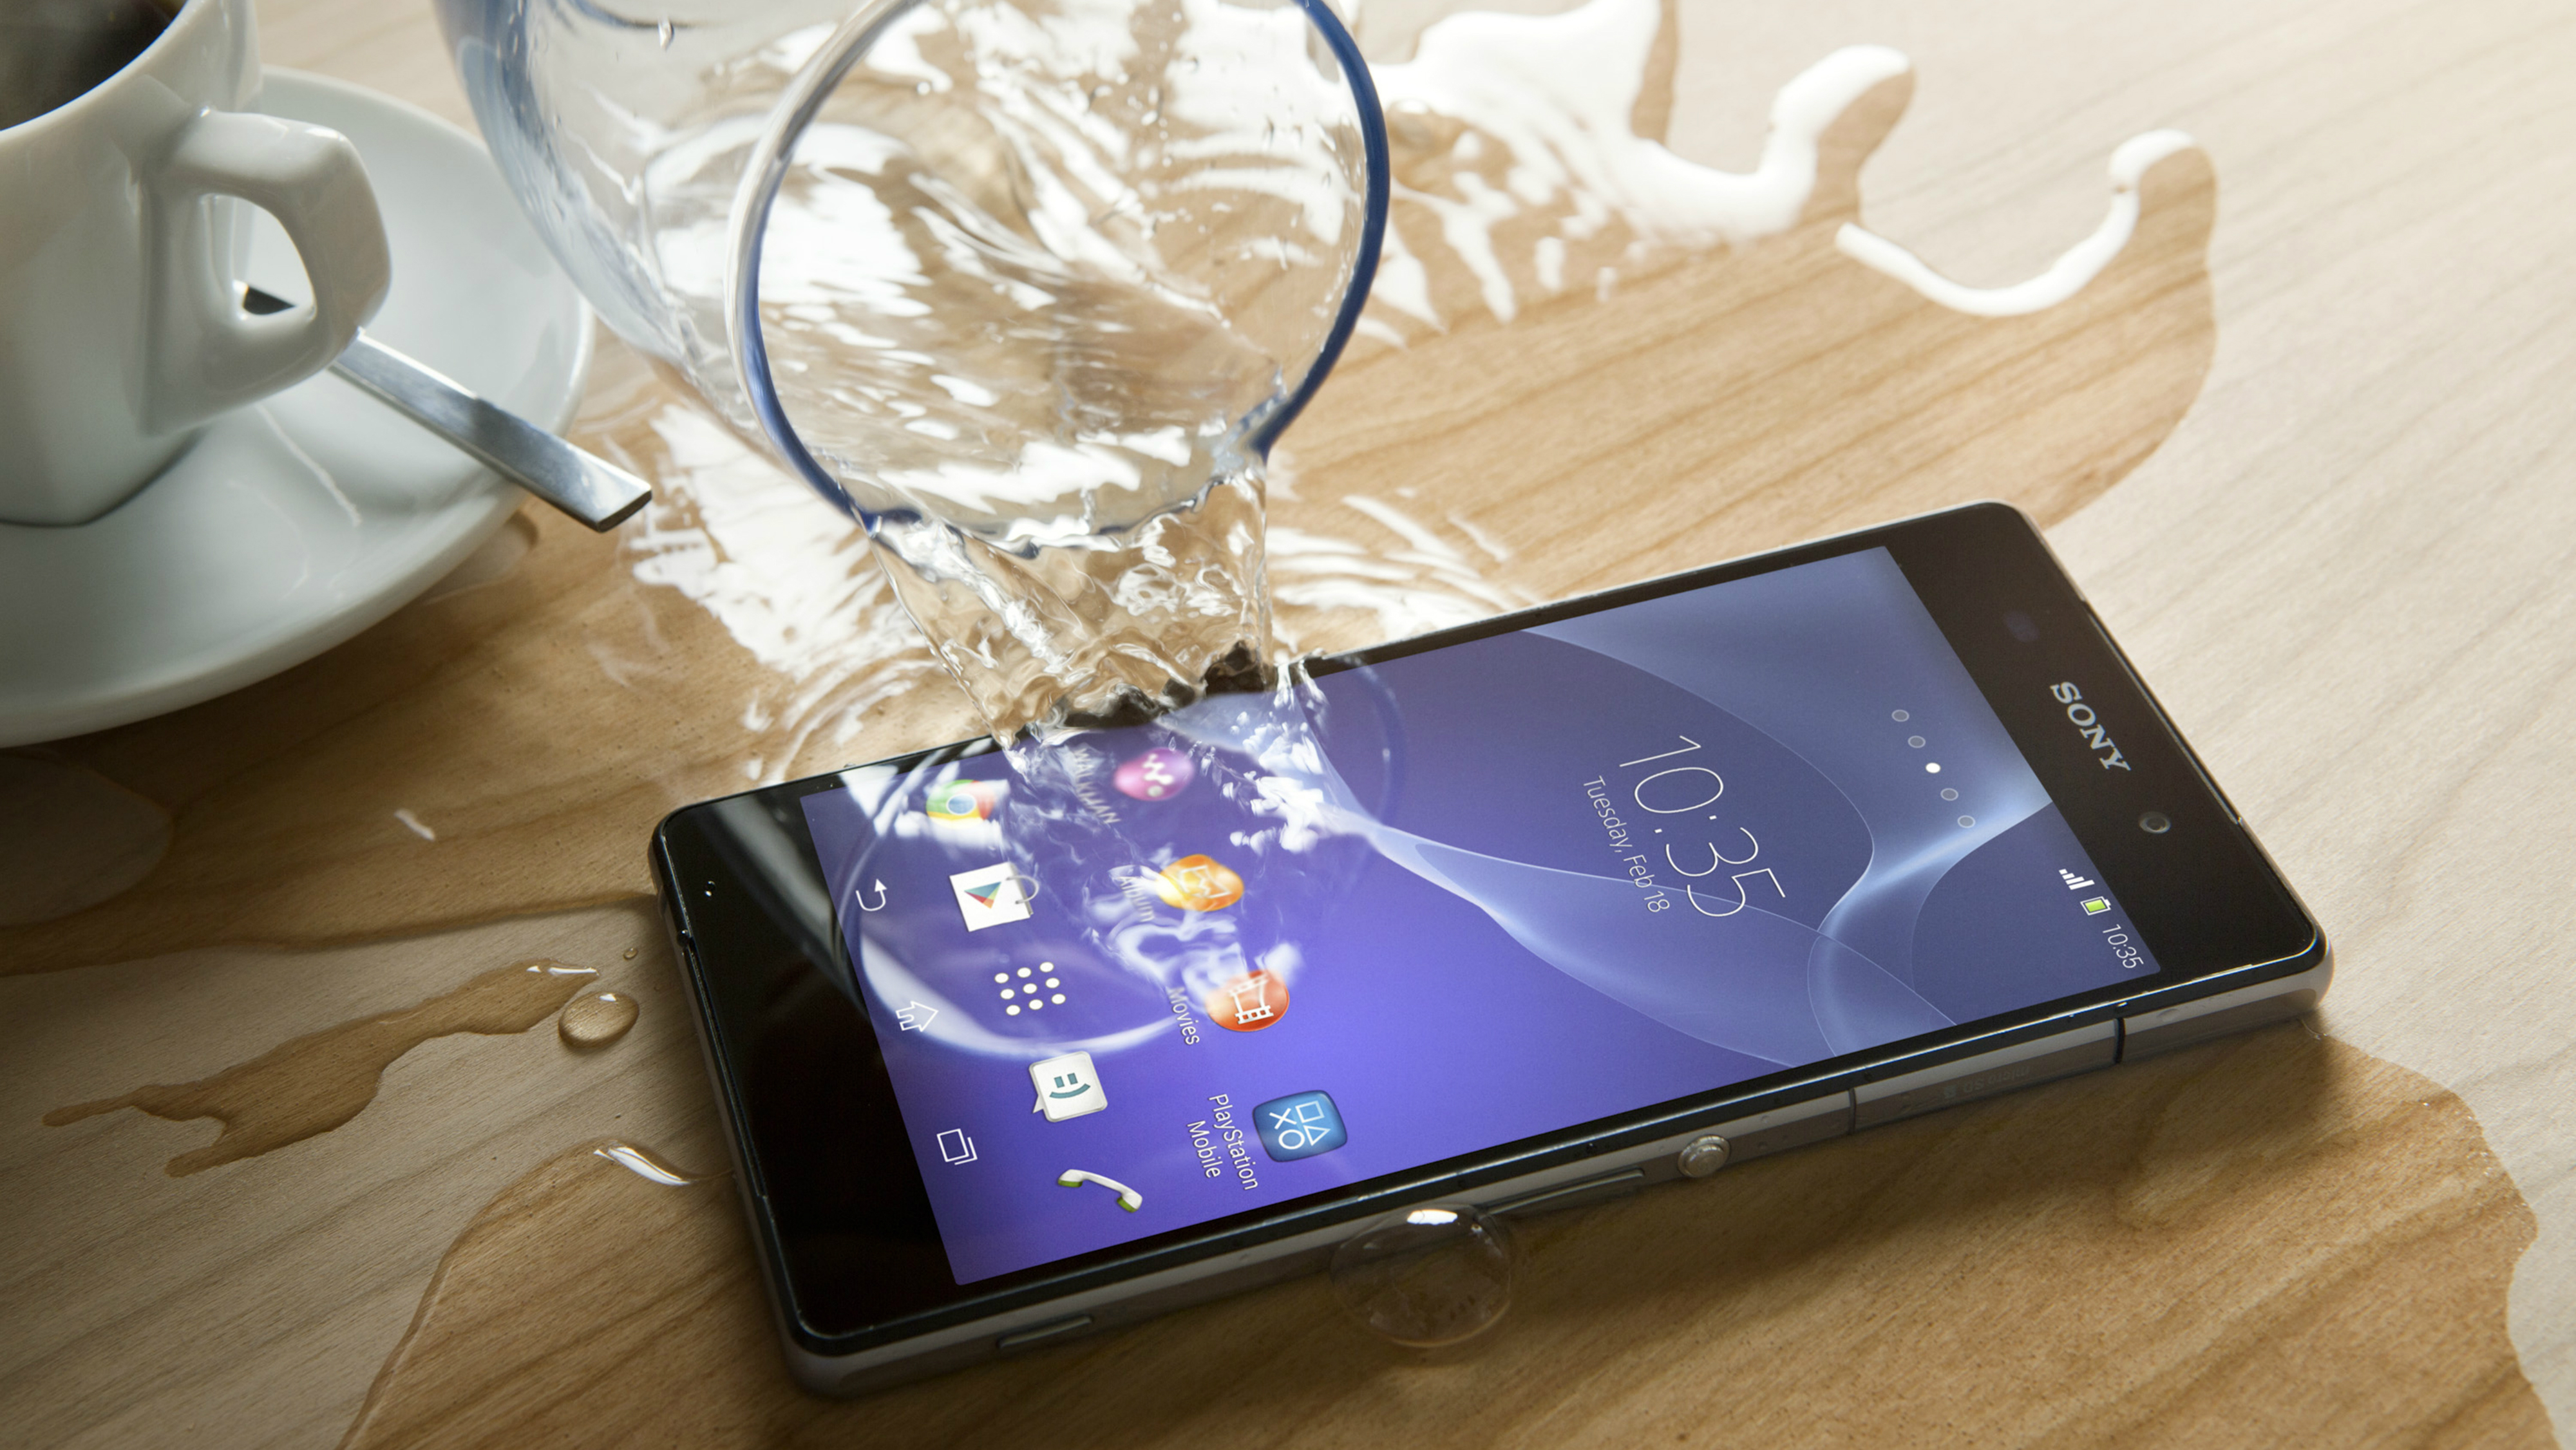 Sony Xperia Z3 Rumours Are Surfacing Already - World's Best Mobile Camera - HD Wallpaper 